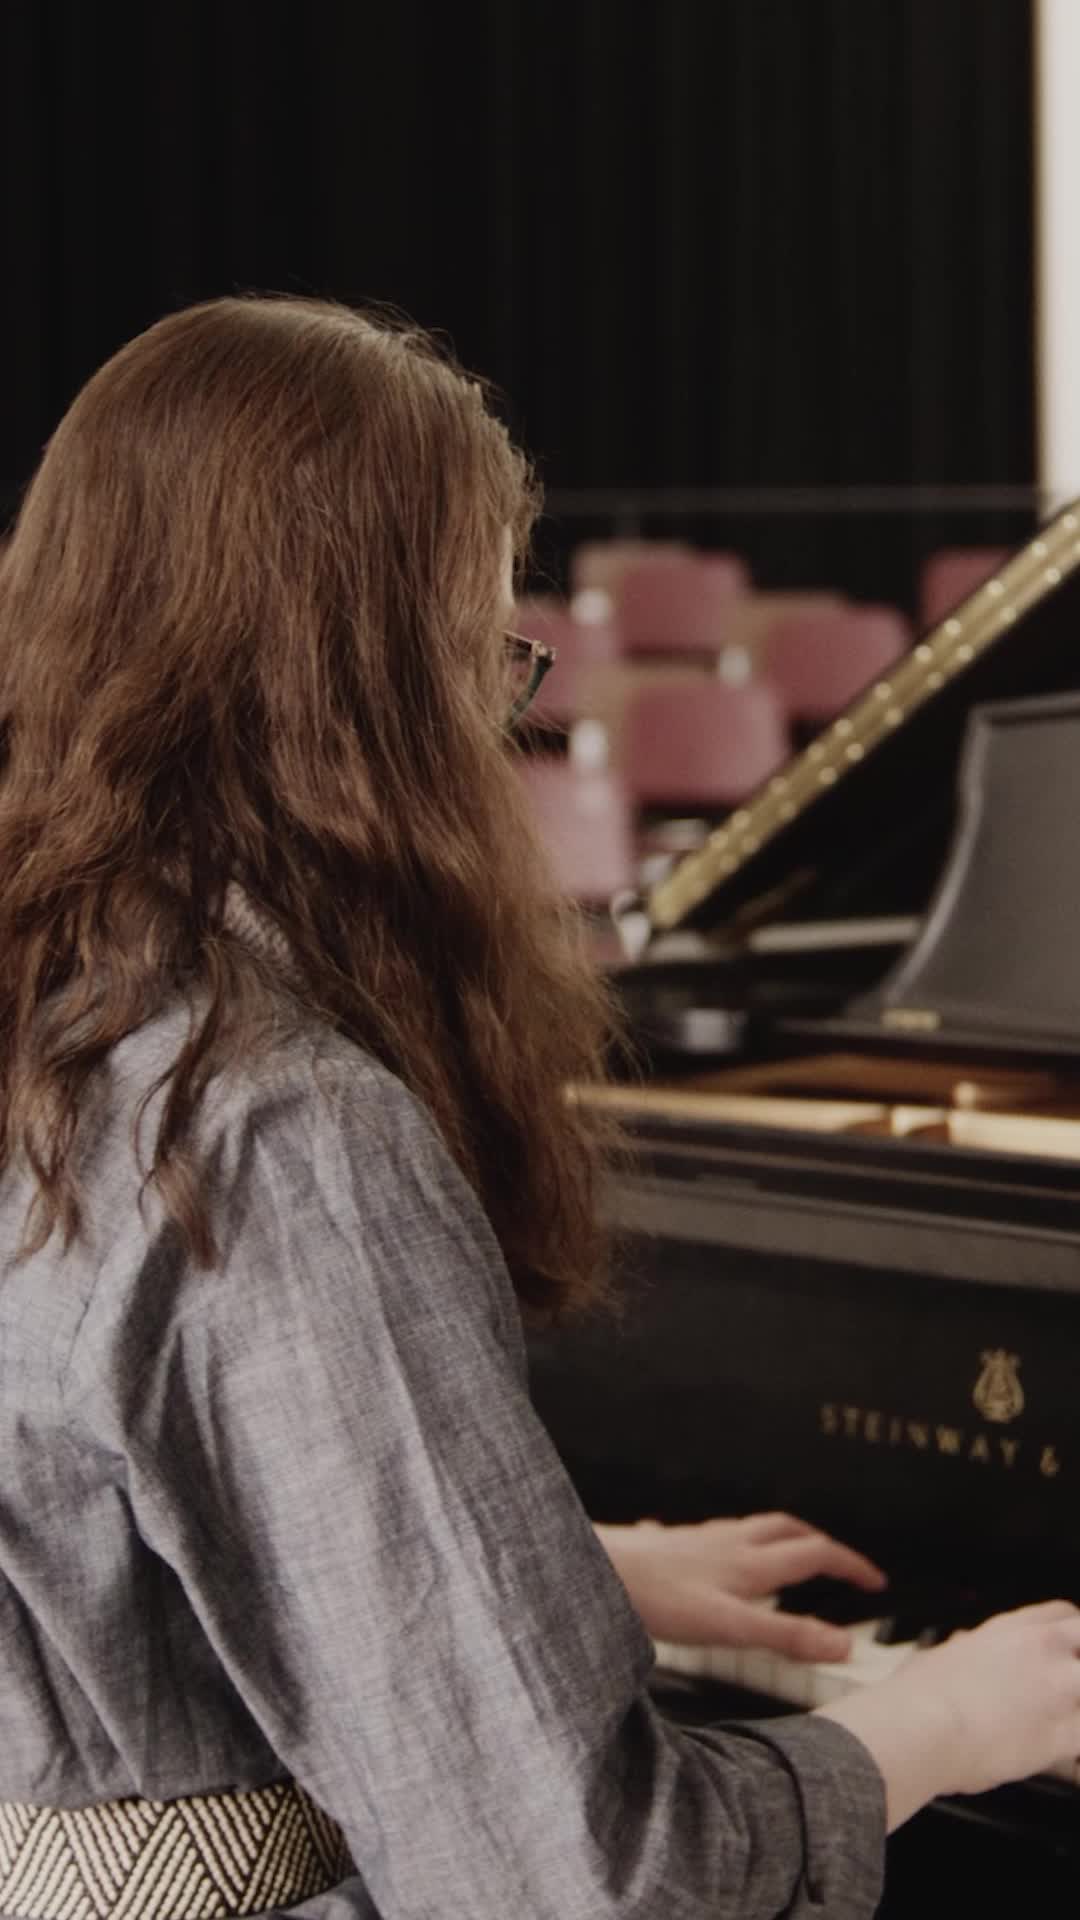 Pangaea Finn, a concert pianist and biophysics researcher playing the piano in a music room.